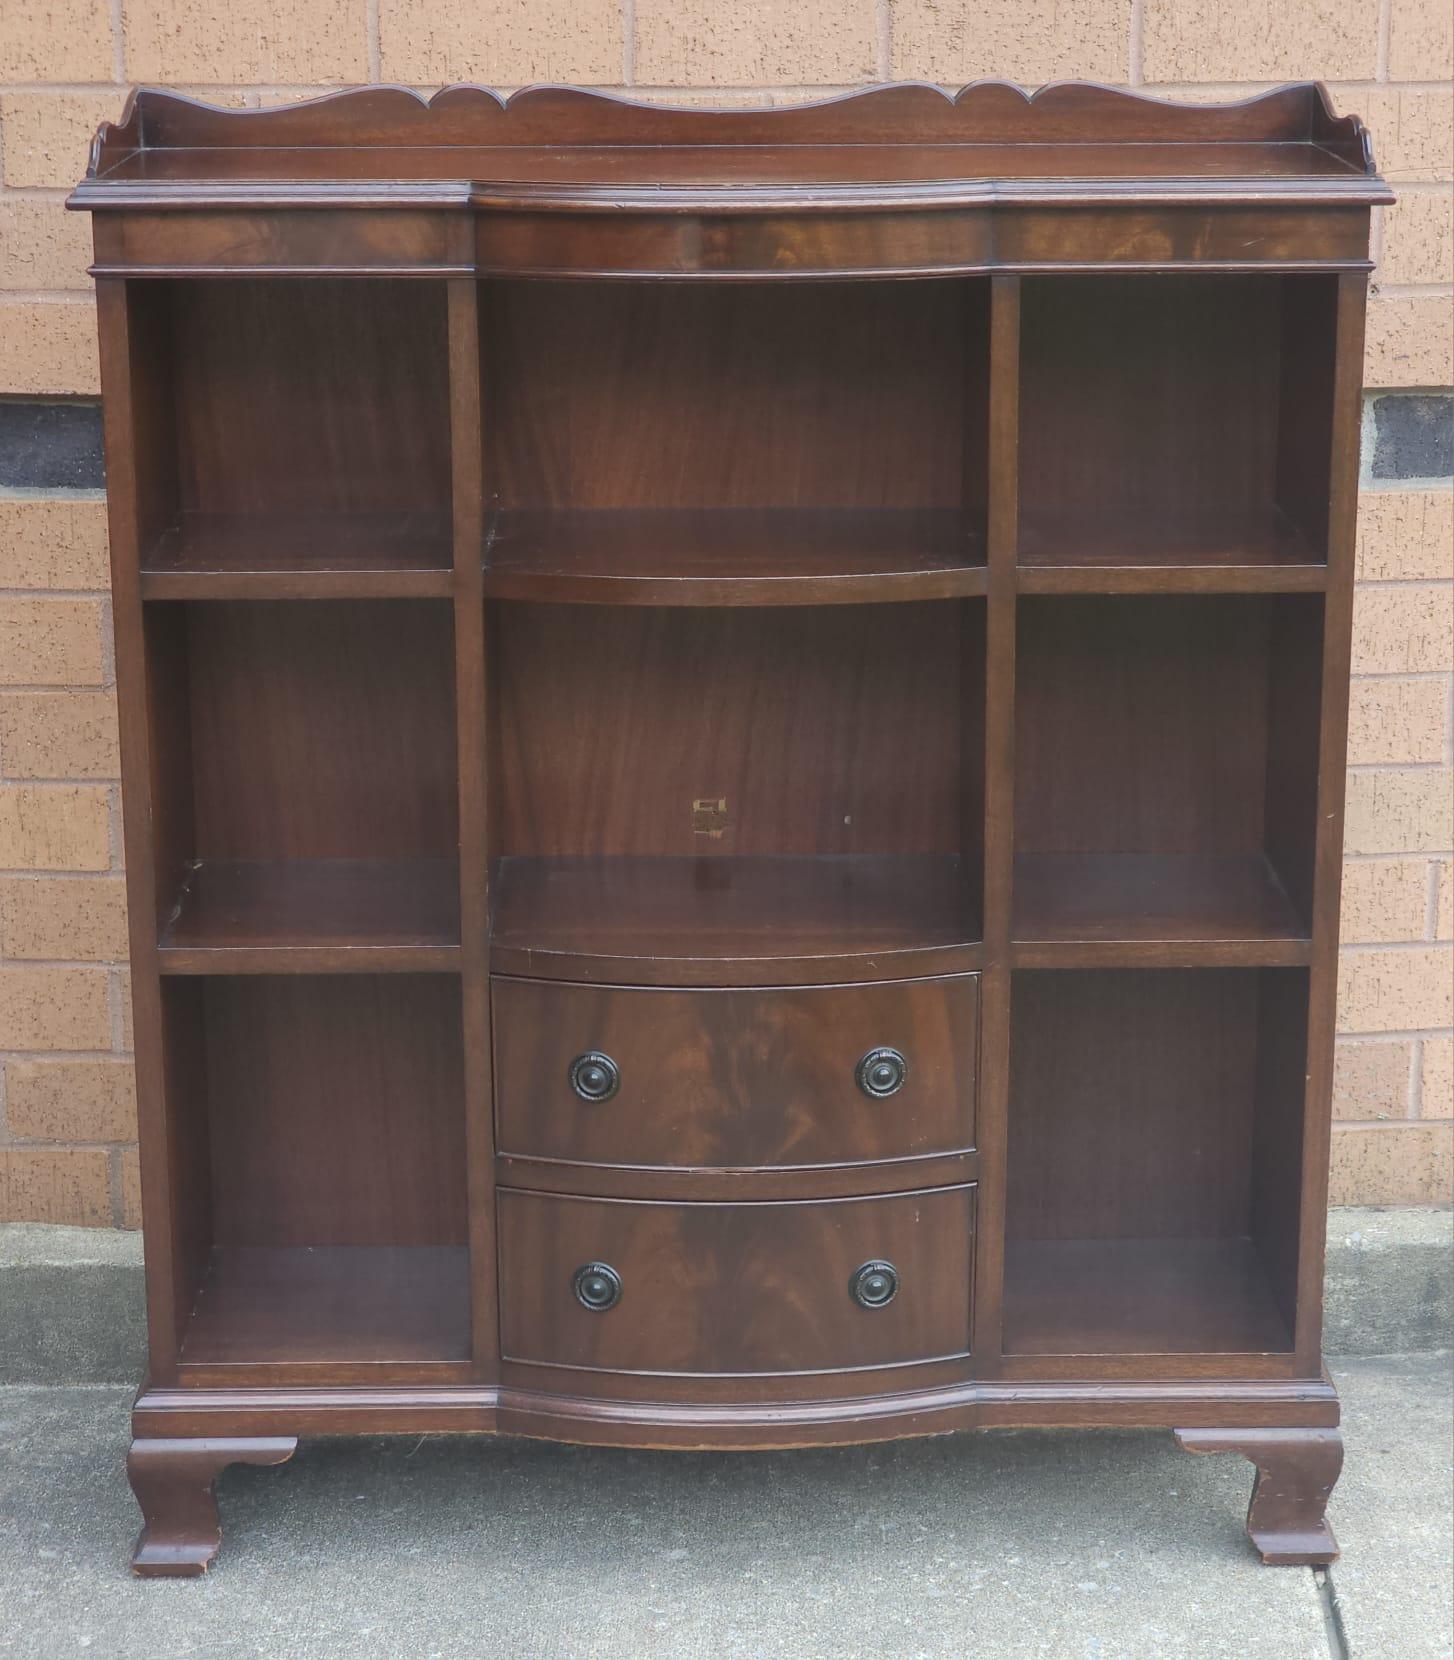 Mid 20th Century Federal Style Mahogany Display Cabinet measuring 35.5